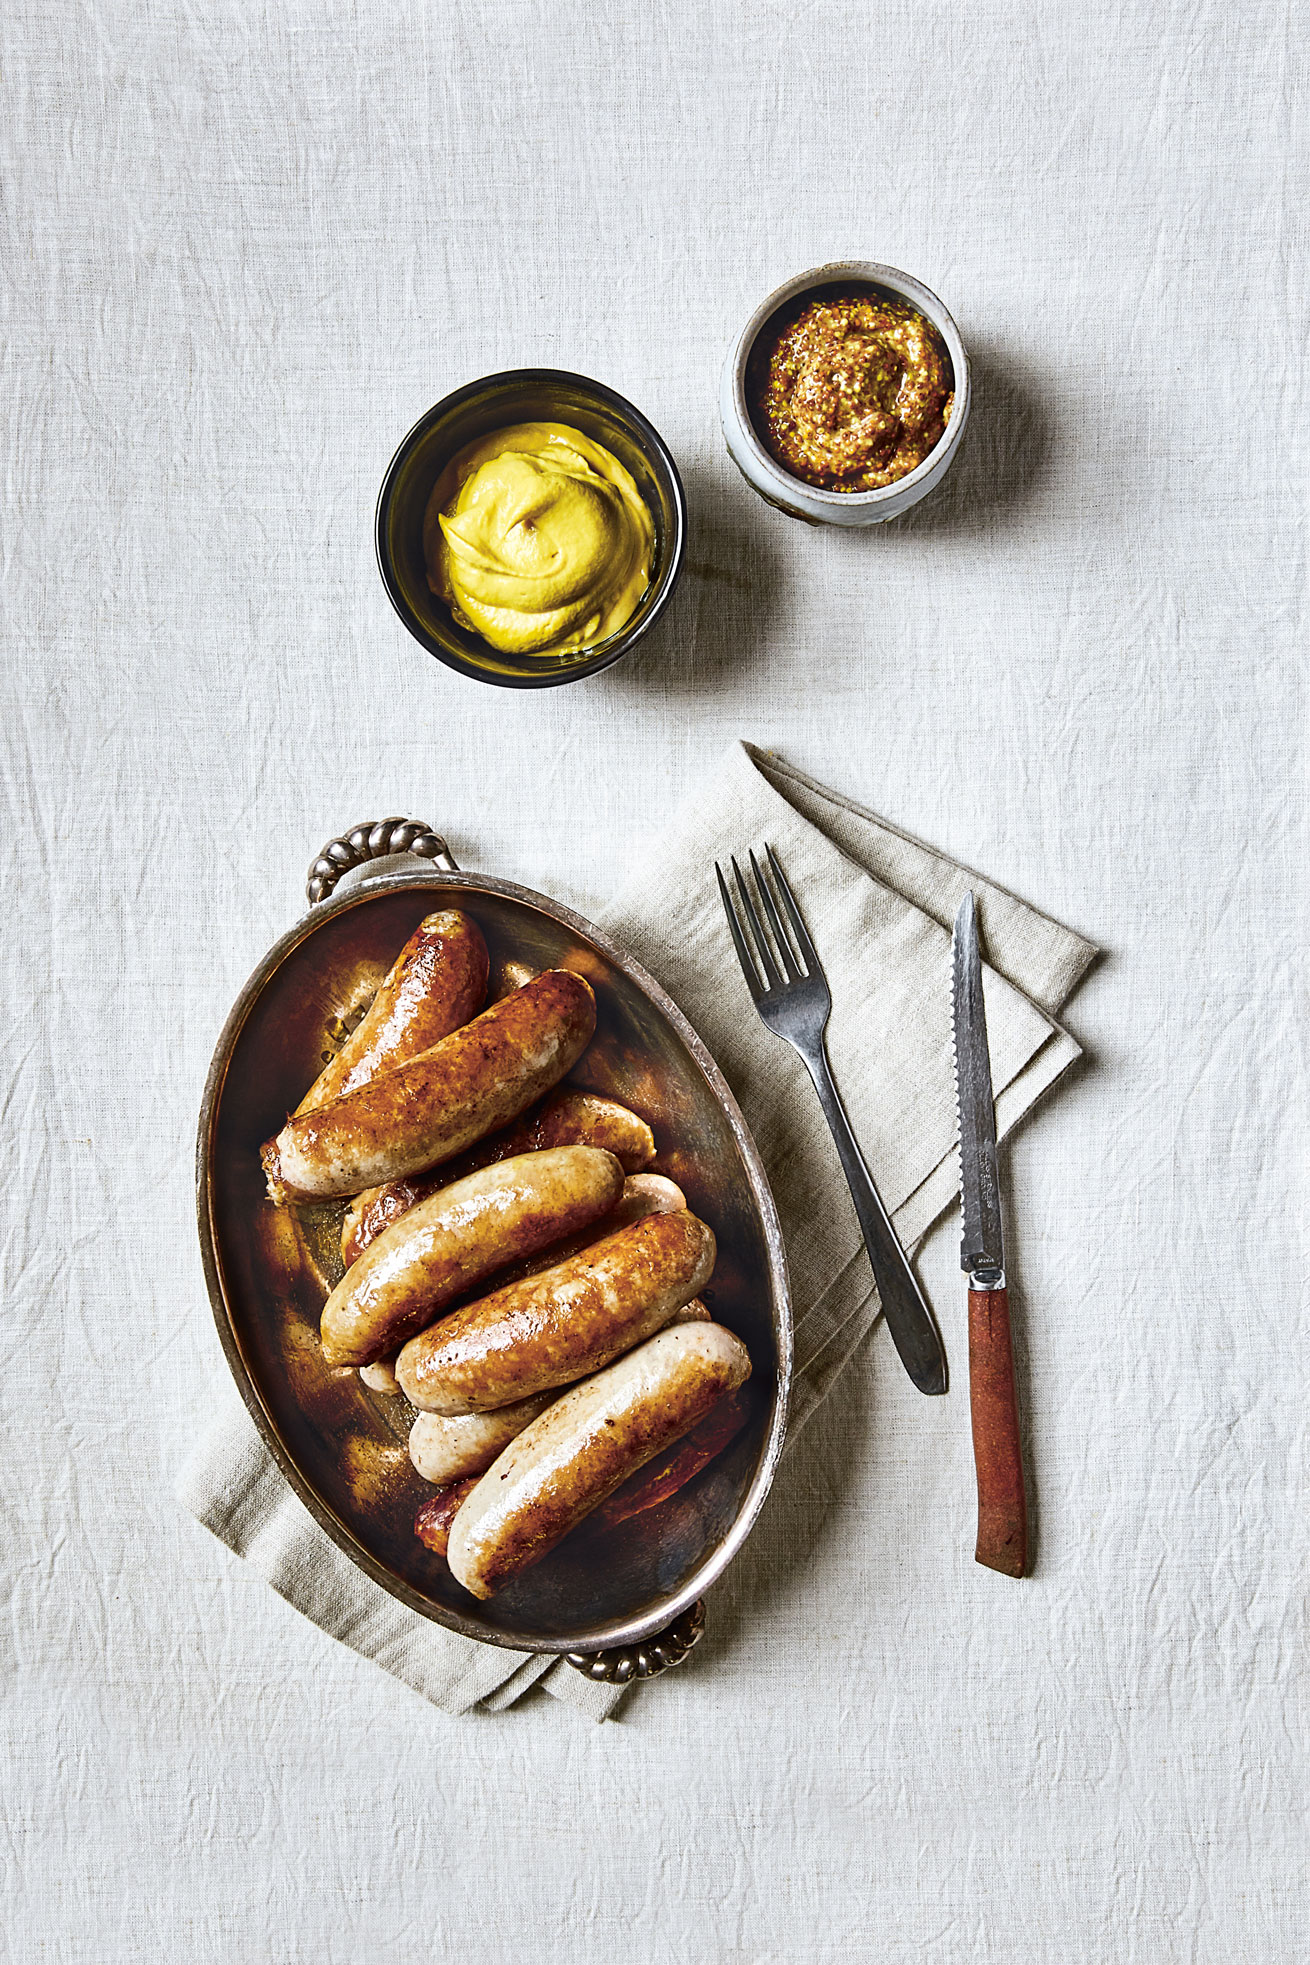 Homemade Thuringian-Style Bratwurst. Photography by Danielle Acken from The German Cookbook